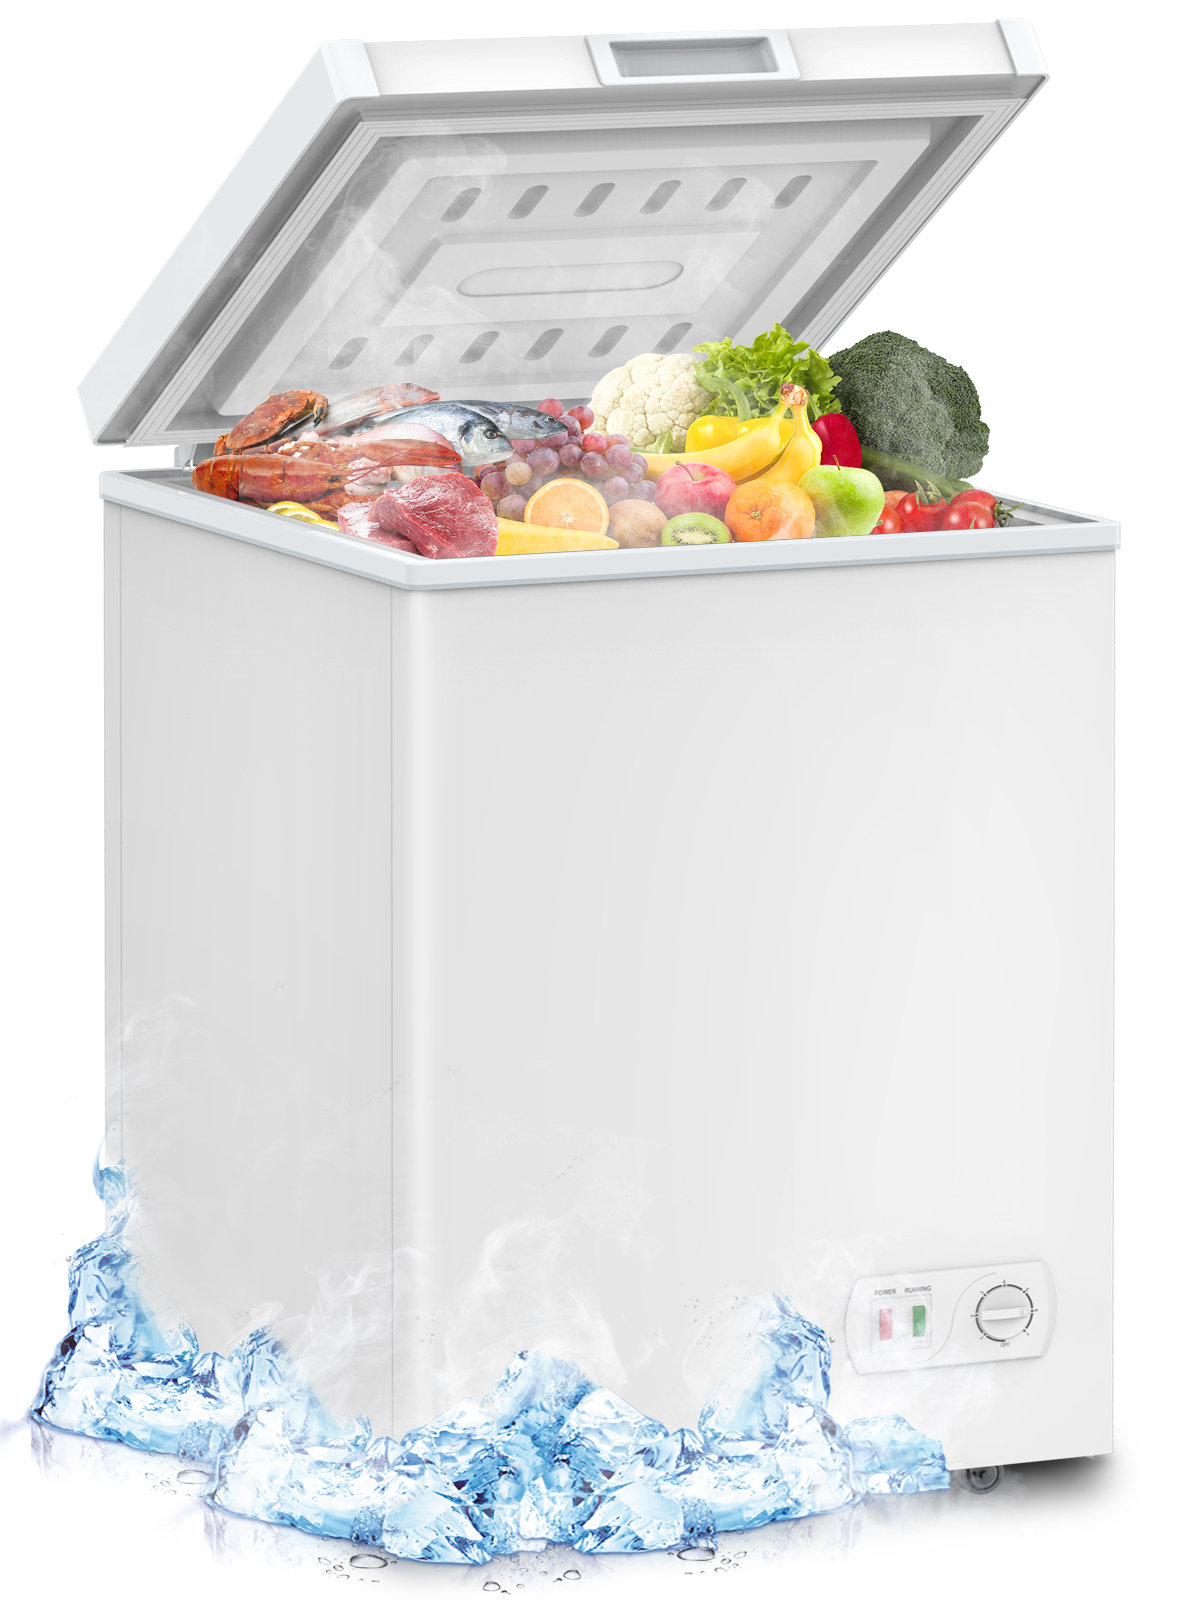 Portable 3.5 Cubic Feet Chest Freezer with Adjustable Temperature Controls